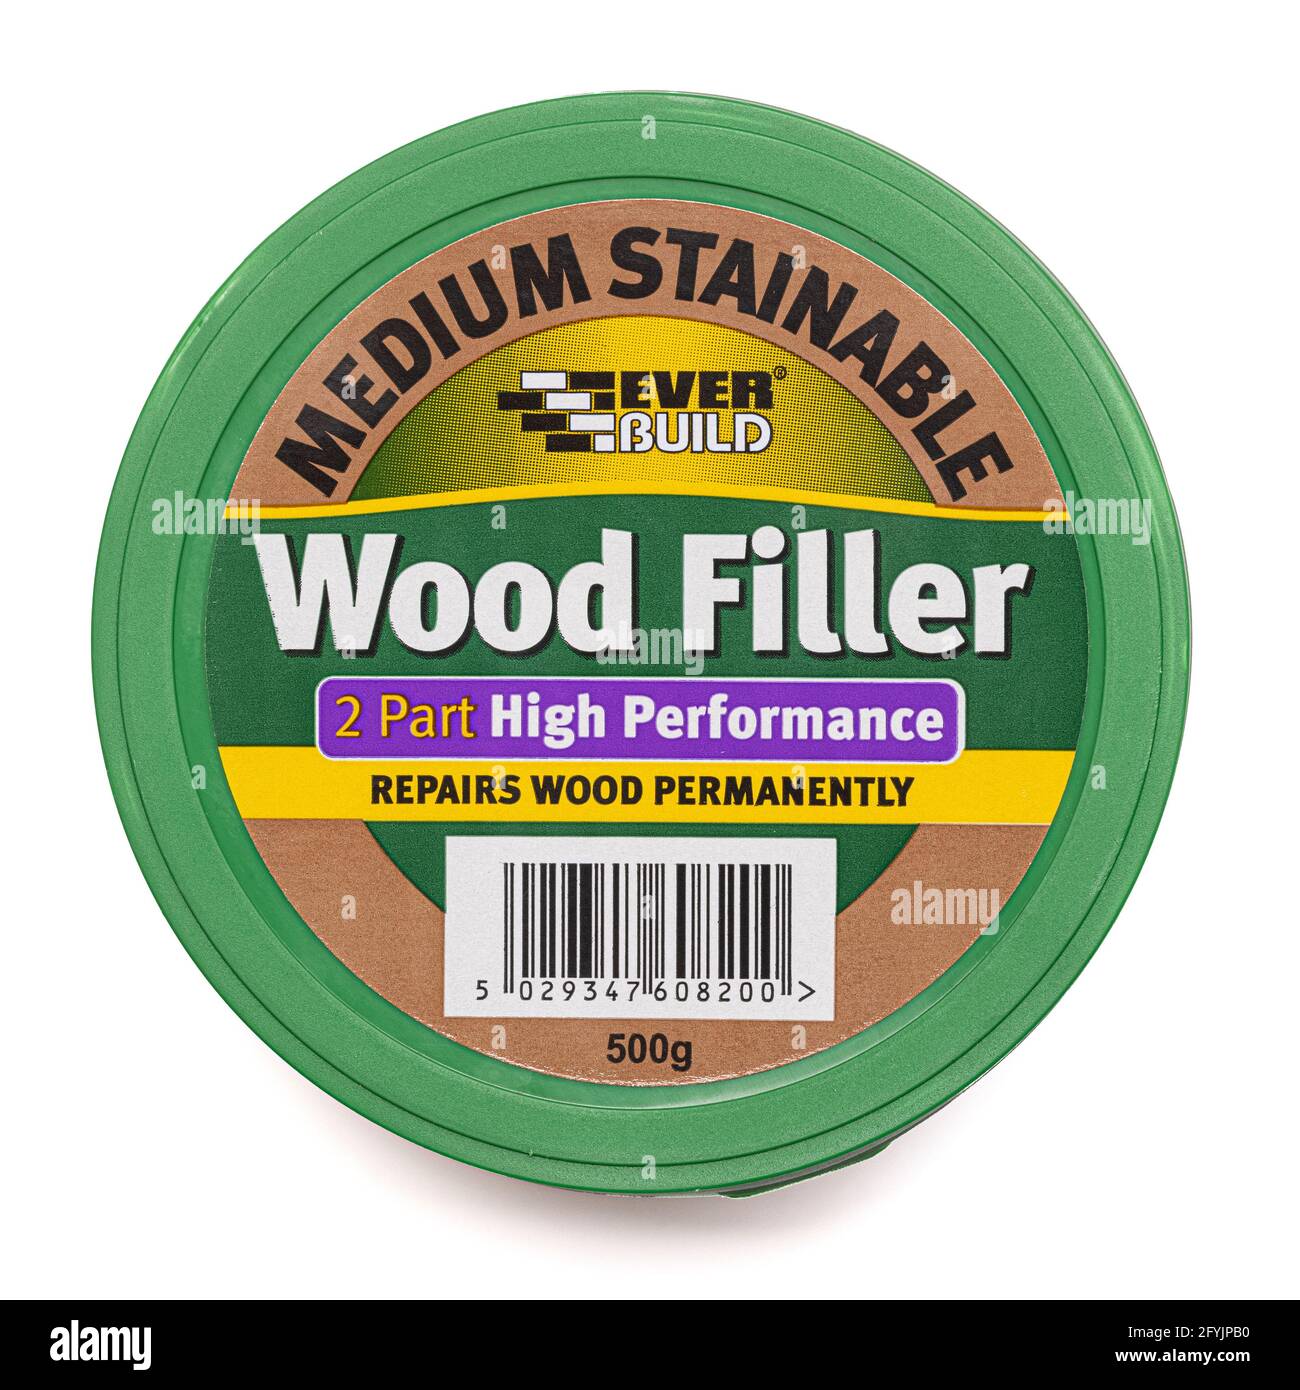 Ever Build Medium Stainable 2 Part High Performance Wood Filler - Repairs Wood  Permanently Stock Photo